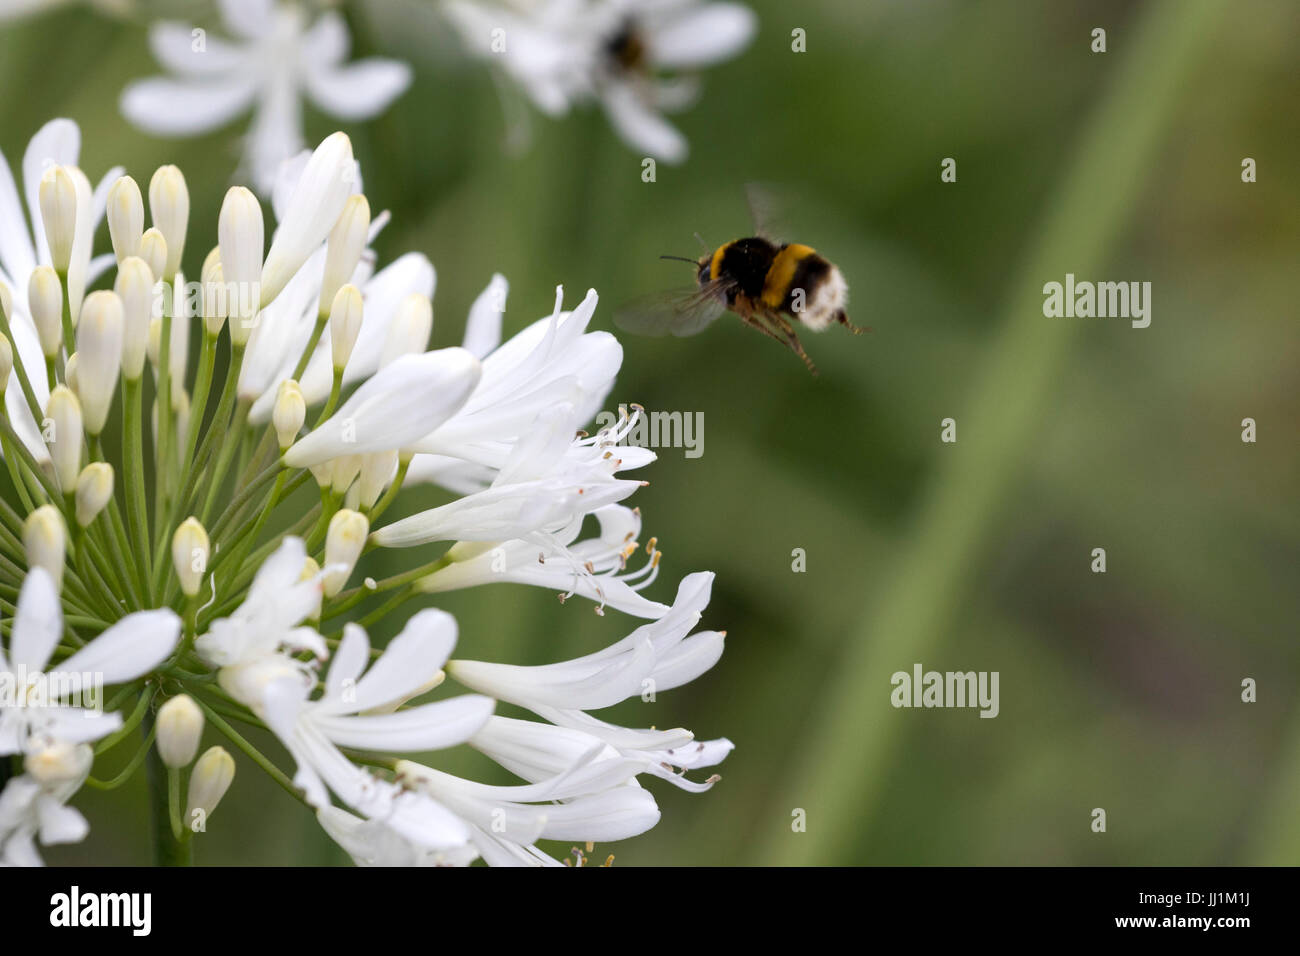 Bumblebee (Bombus) about to land in Agapanthus flowers. Stock Photo